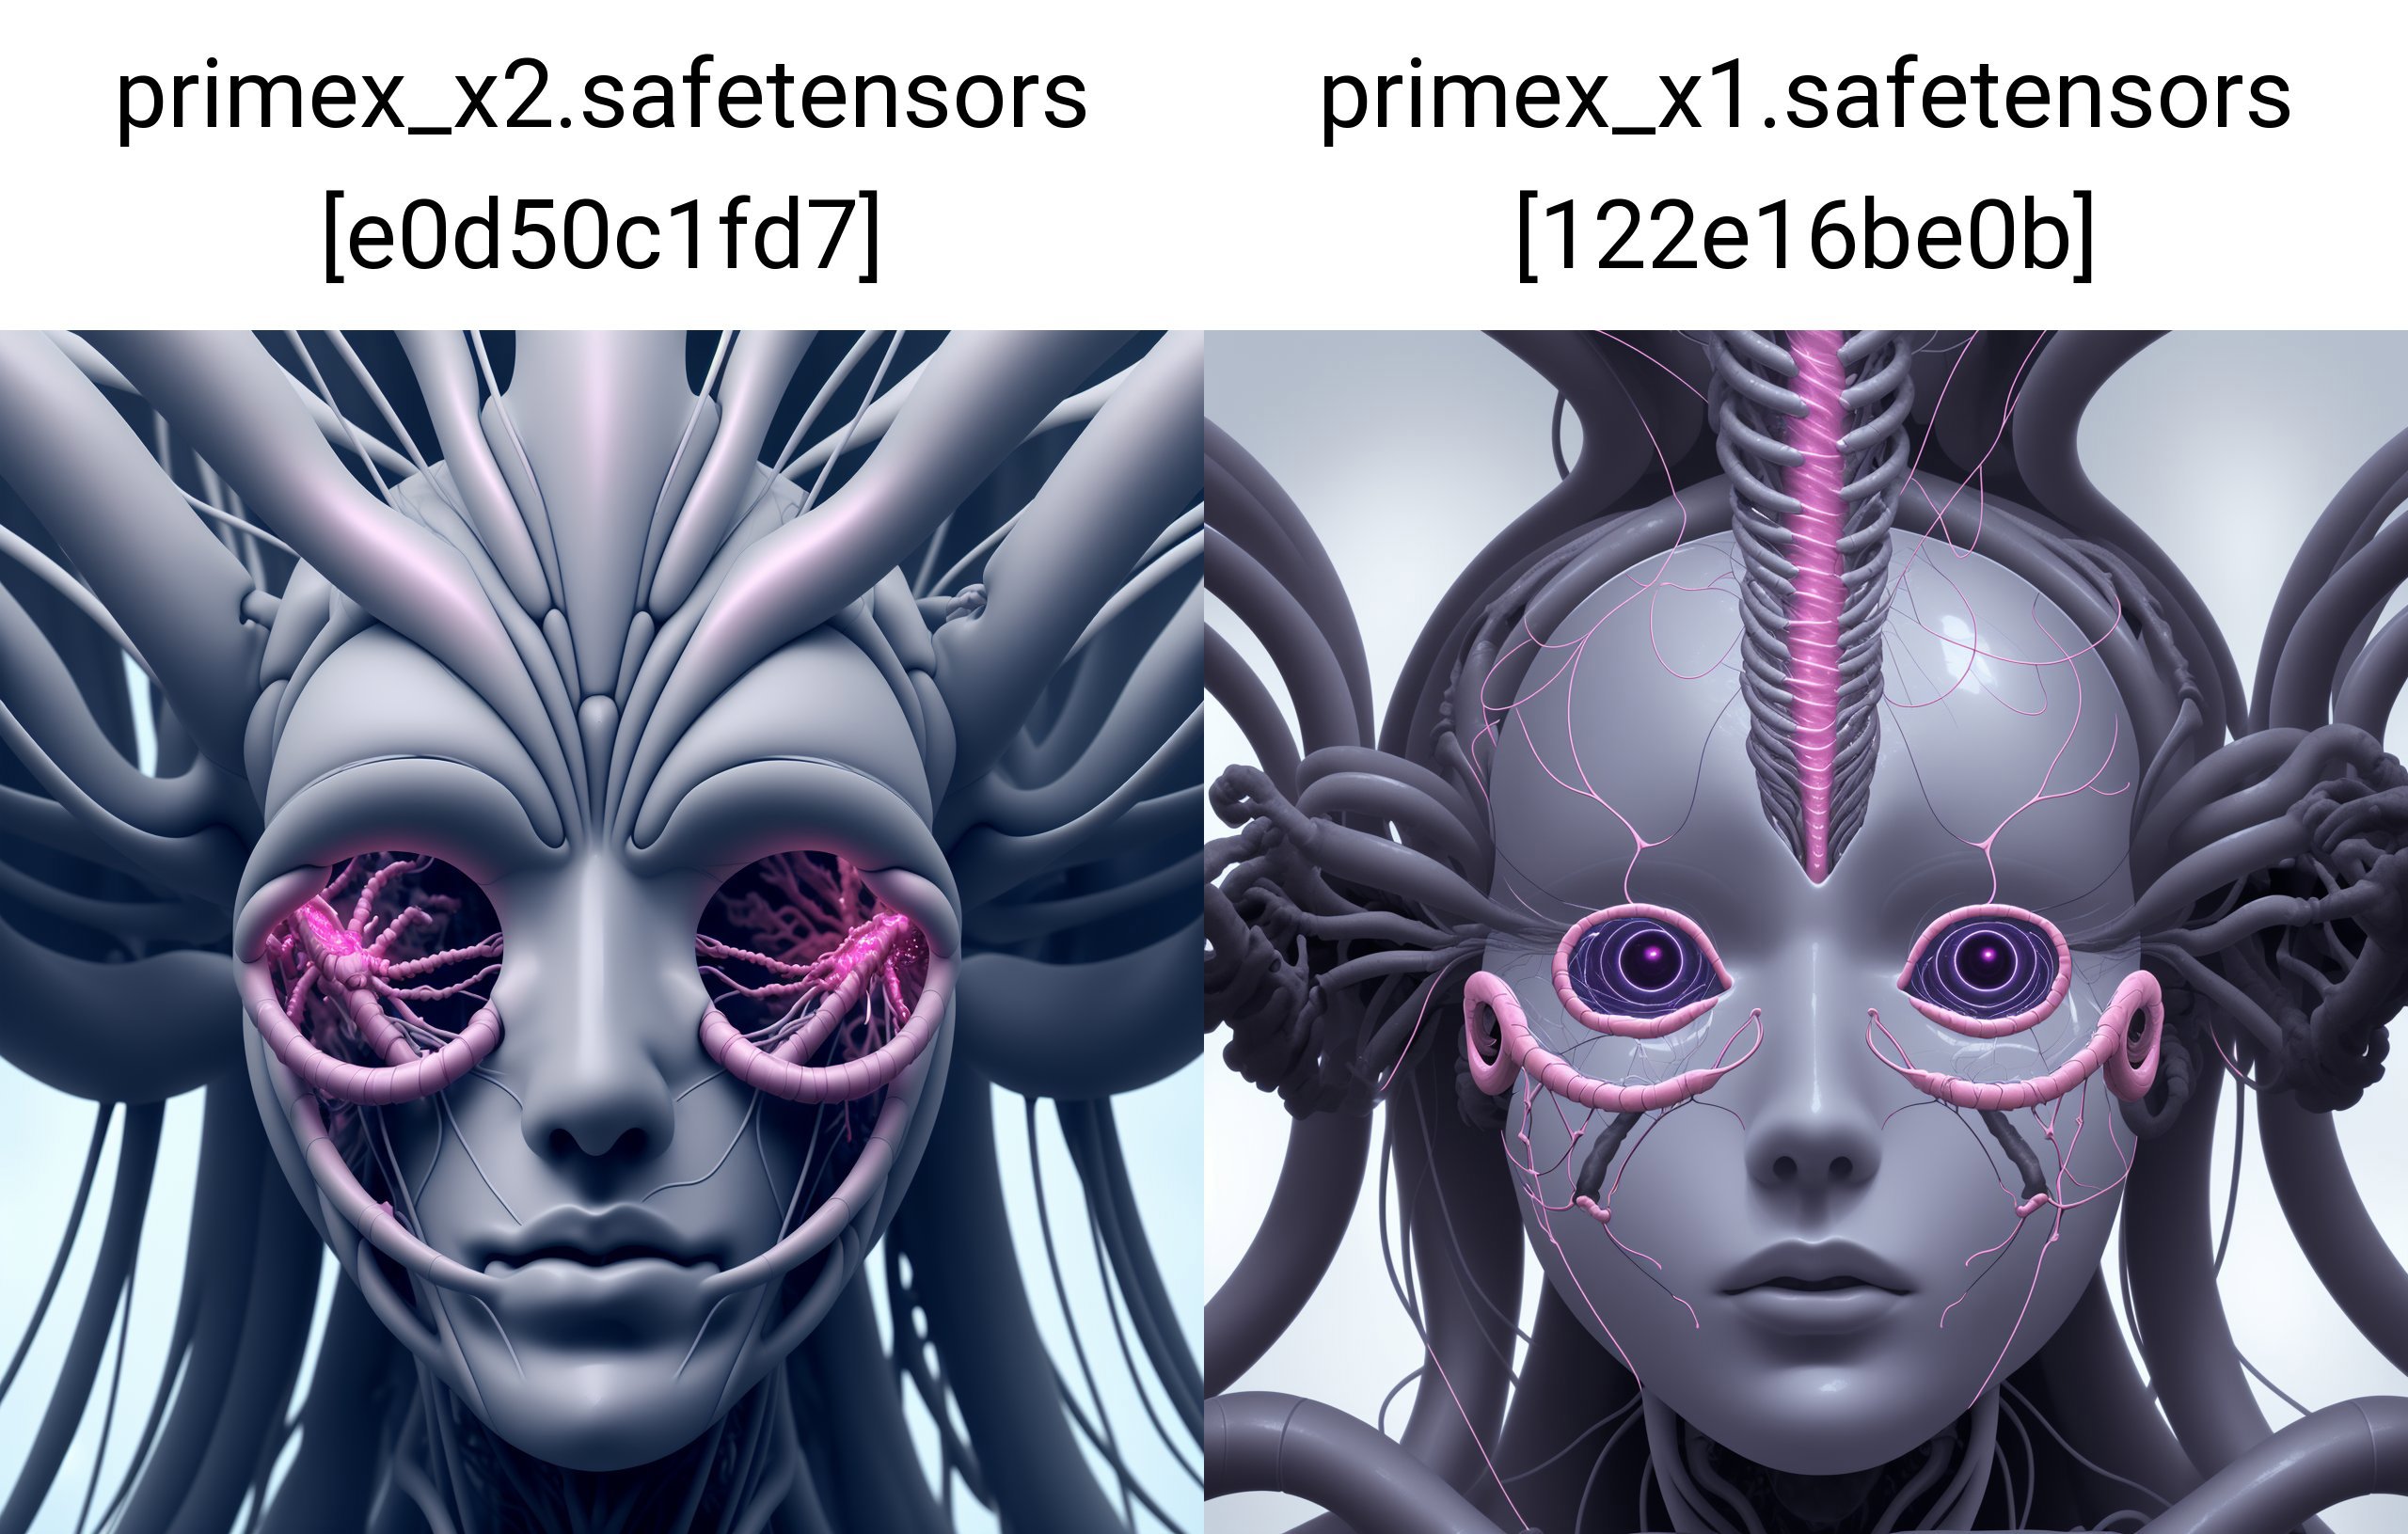 PrimeX image by Perl404